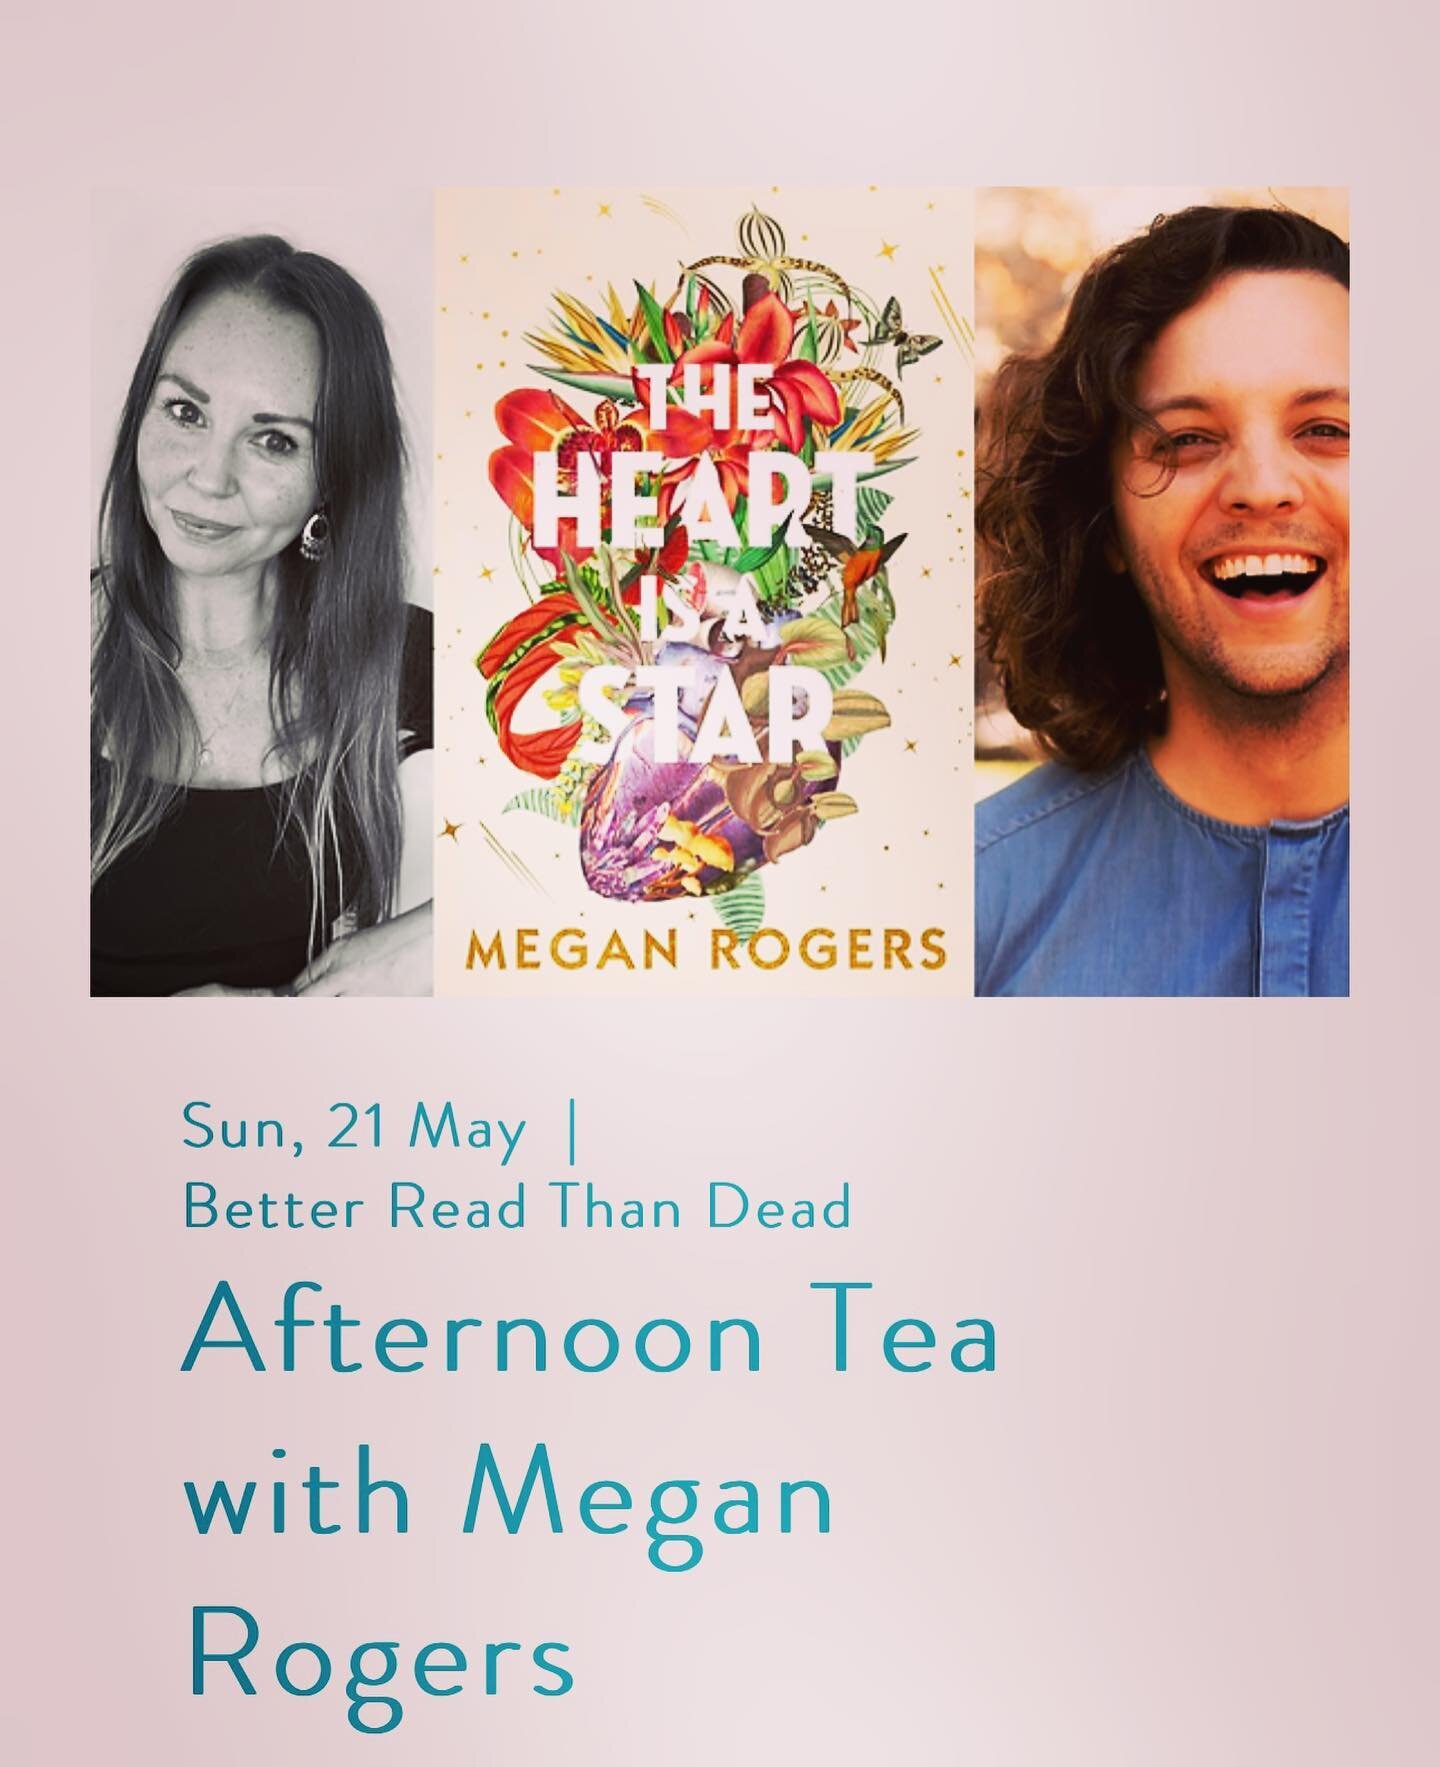 SYDNEY!

We are coming for you with much excitement &hearts;️⭐️

Join @seanszeps and me with champagne, tea and cakes, as we launch The Heart is a Star into the city with probably a lot of laughter and tears xxx

We&rsquo;ll talk all things The Heart